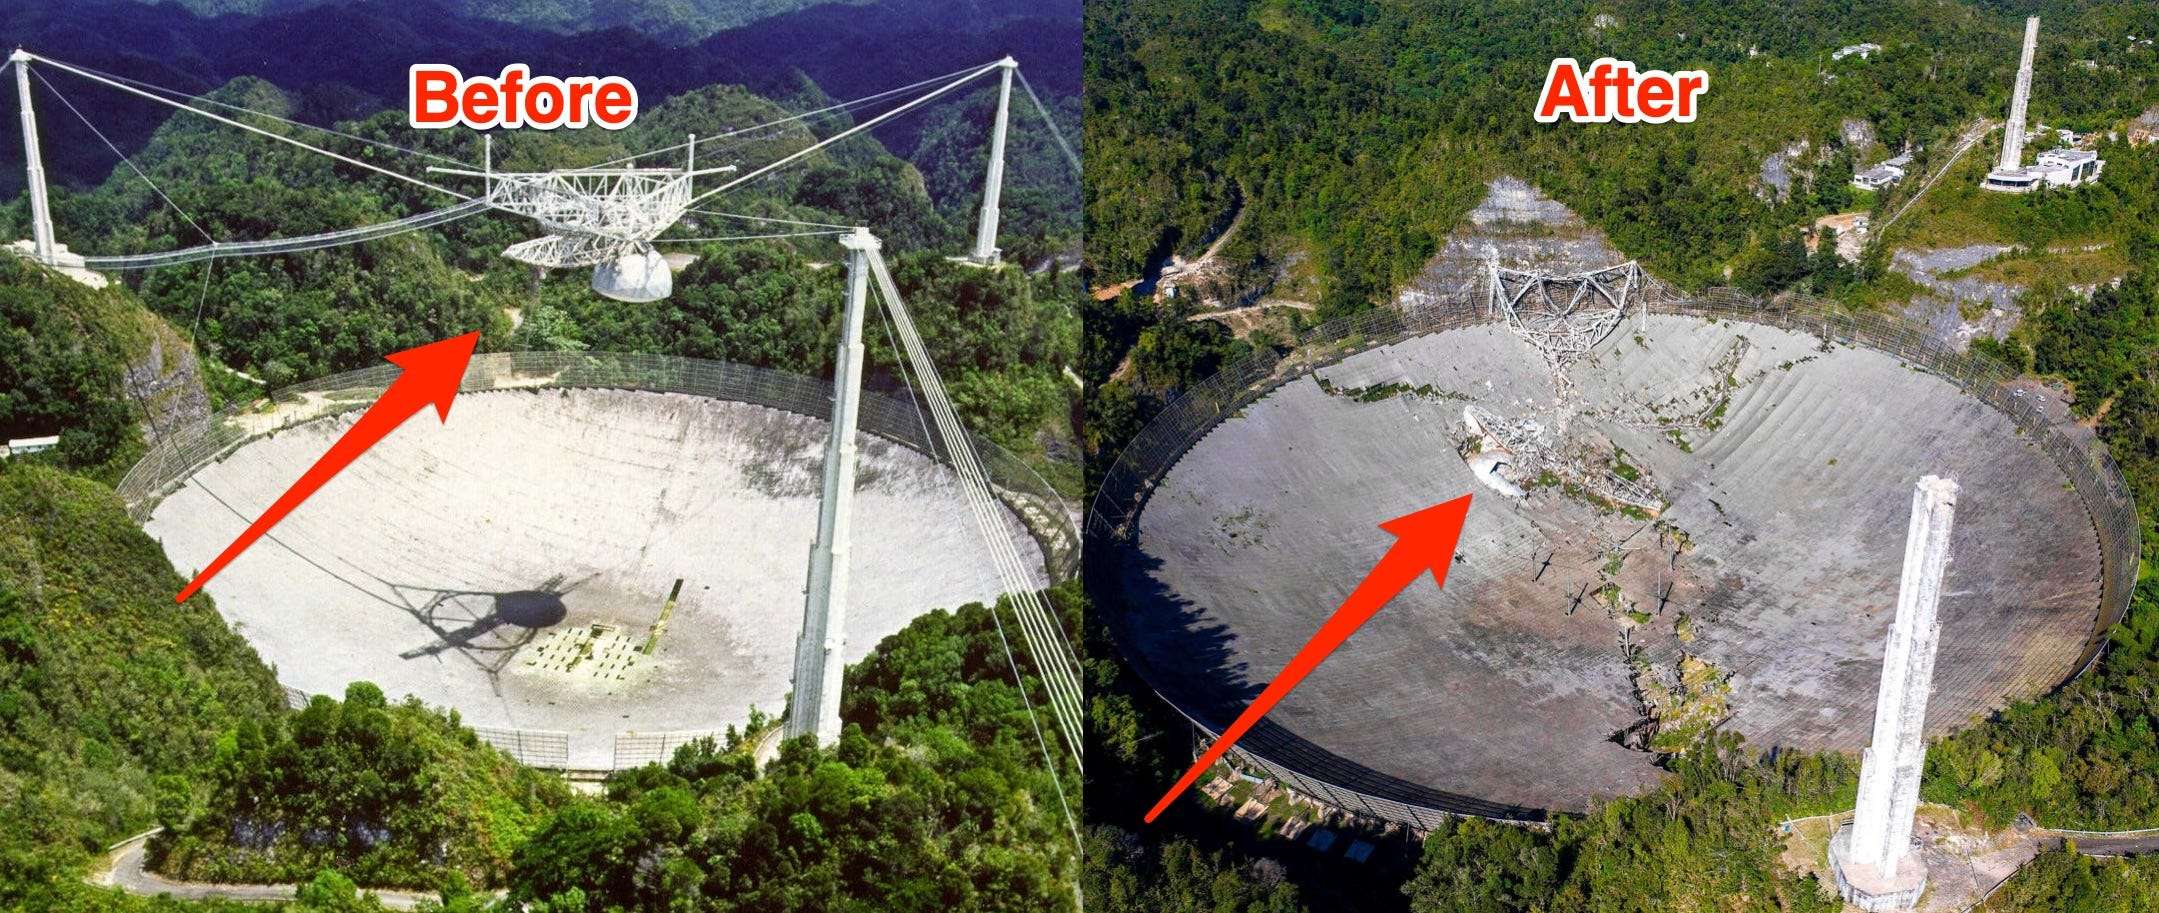 Photos Show What The Arecibo Telescope Looked Like Before And After Its Disastrous Collapse 3605